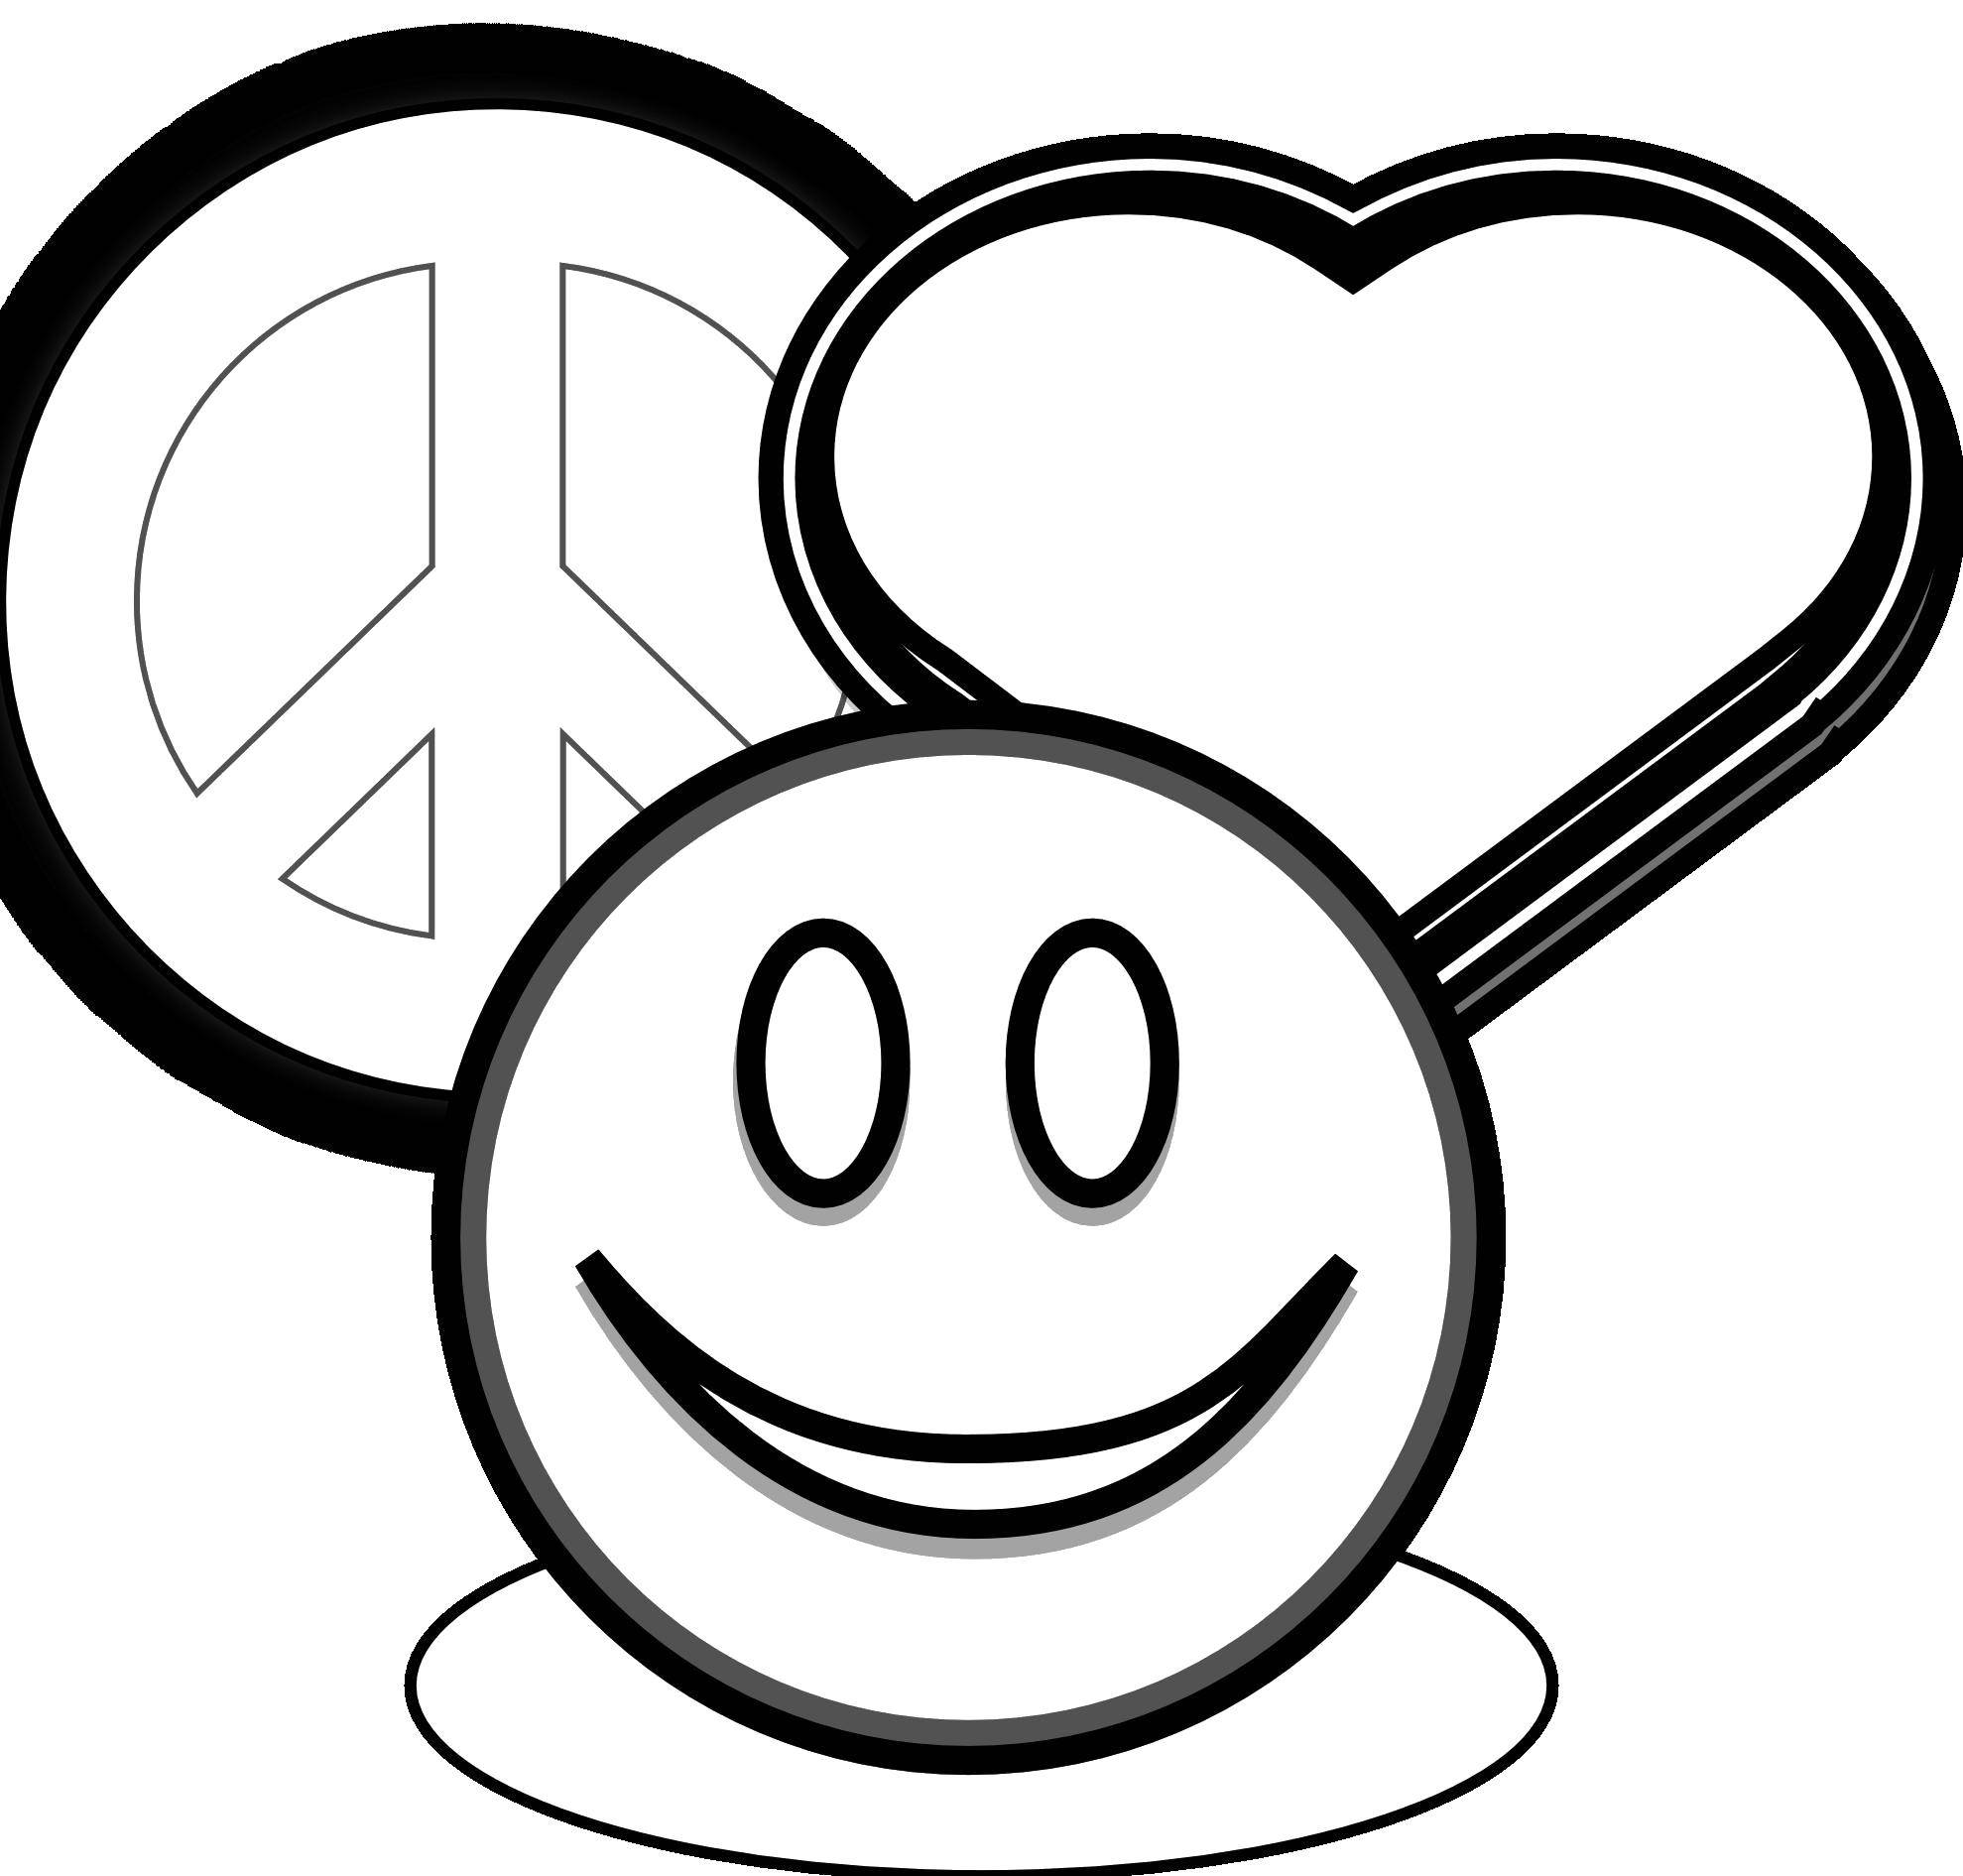 Coloring Sign hippie smile and heart. Category coloring. Tags:  Sign, smile, cardio.